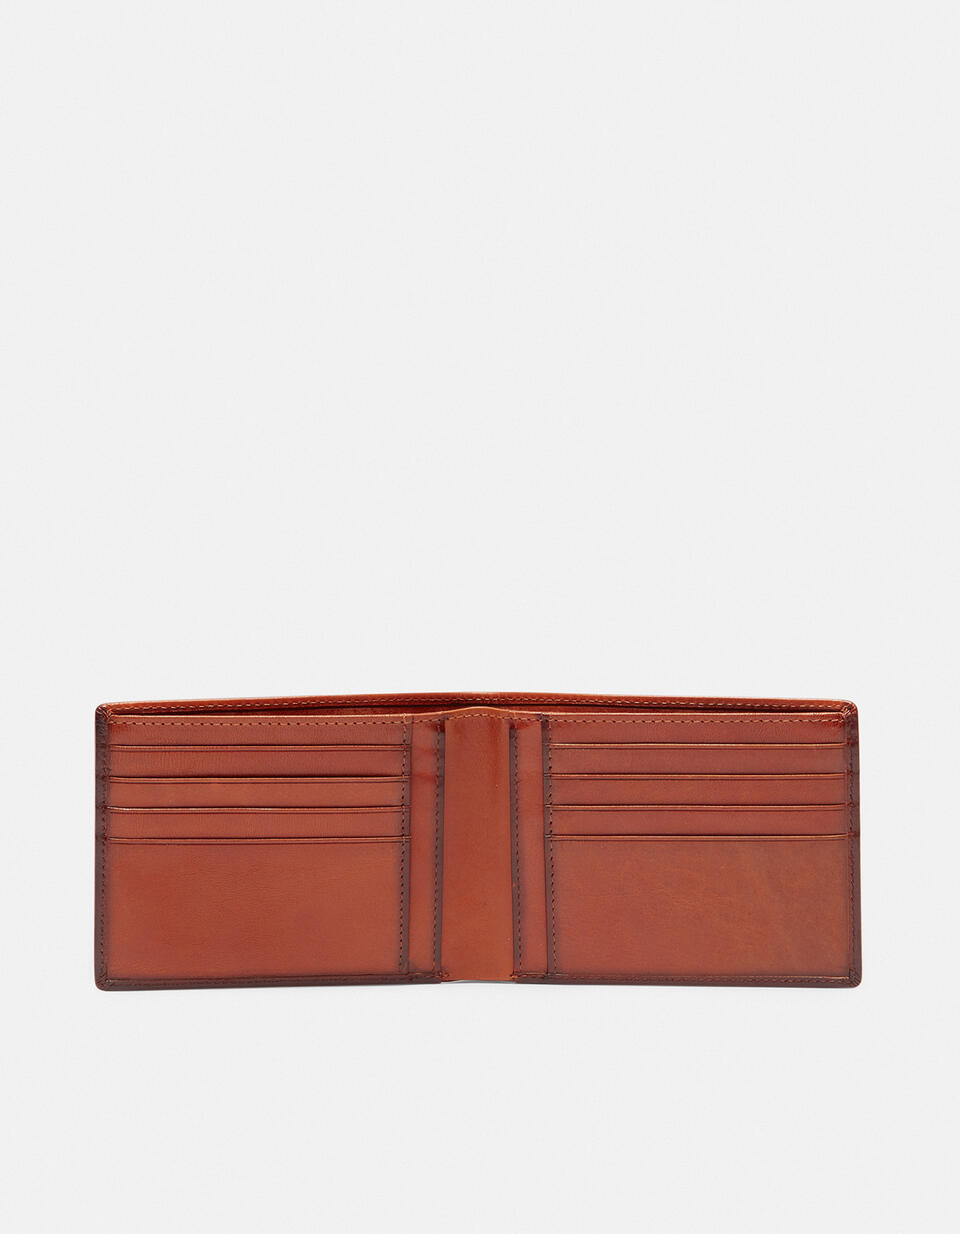 Leather Warm and Color Anti-RFid Wallet - Women's Wallets - Men's Wallets | Wallets ARANCIO - Women's Wallets - Men's Wallets | WalletsCuoieria Fiorentina